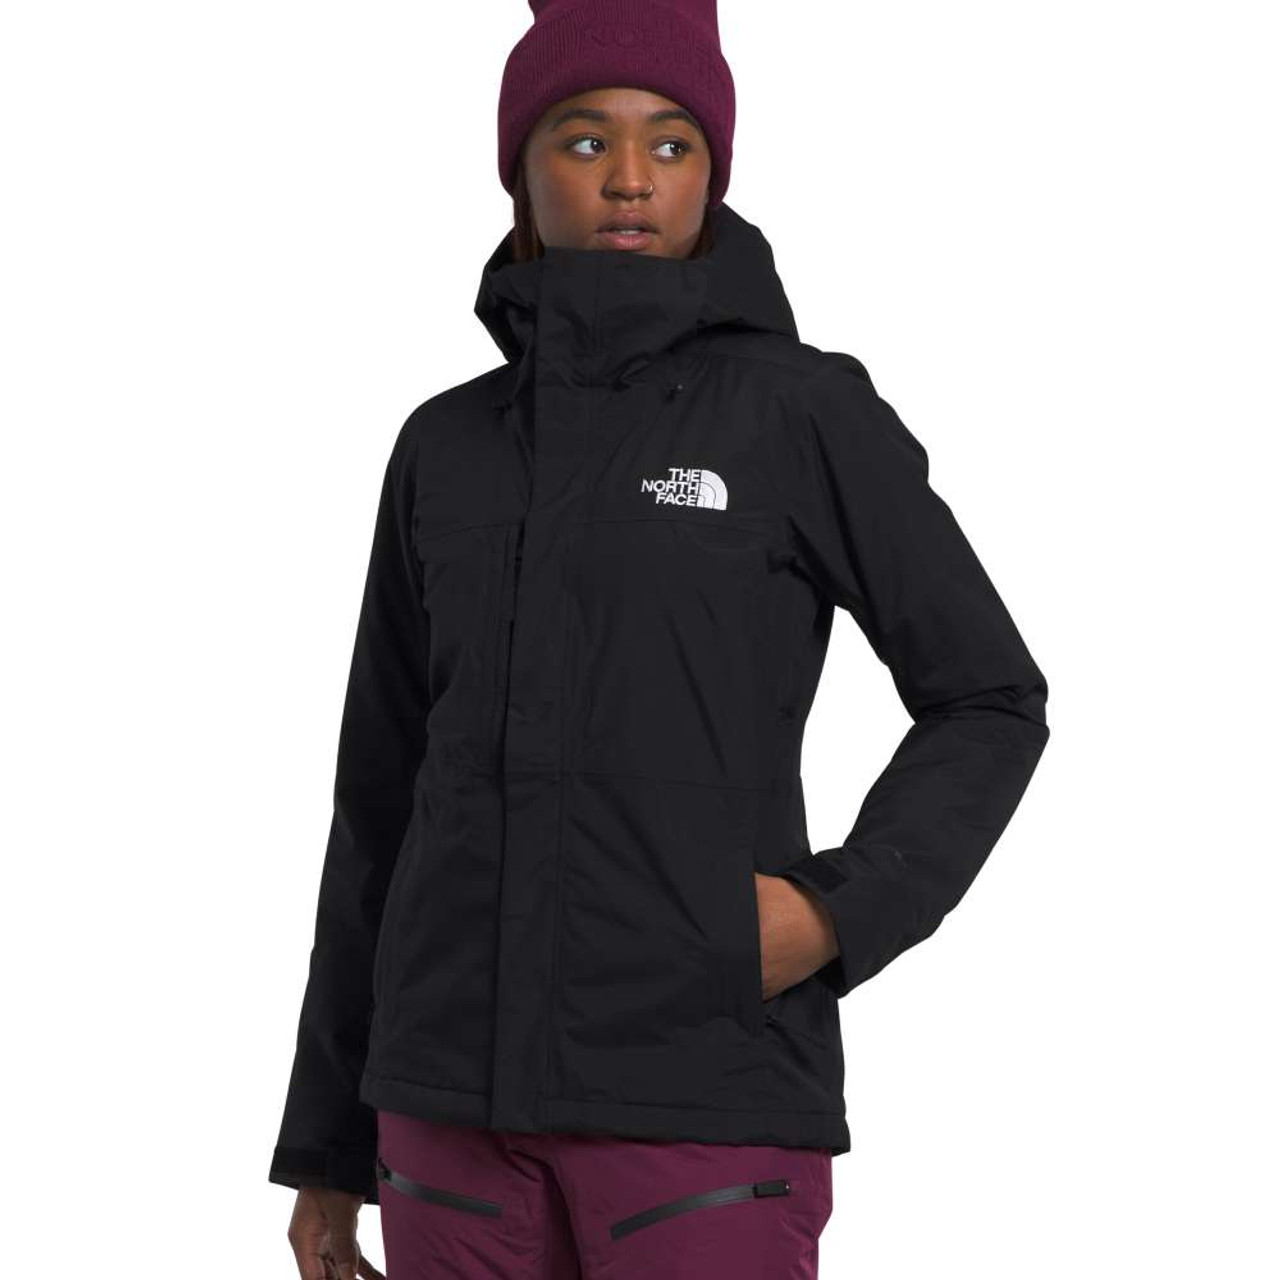 https://cdn11.bigcommerce.com/s-186hk/images/stencil/1280x1280/products/94004/154696/2024-the-north-face-freedom-insulated-jacket-tnf-black-1__07844.1696531624.jpg?c=2?imbypass=on